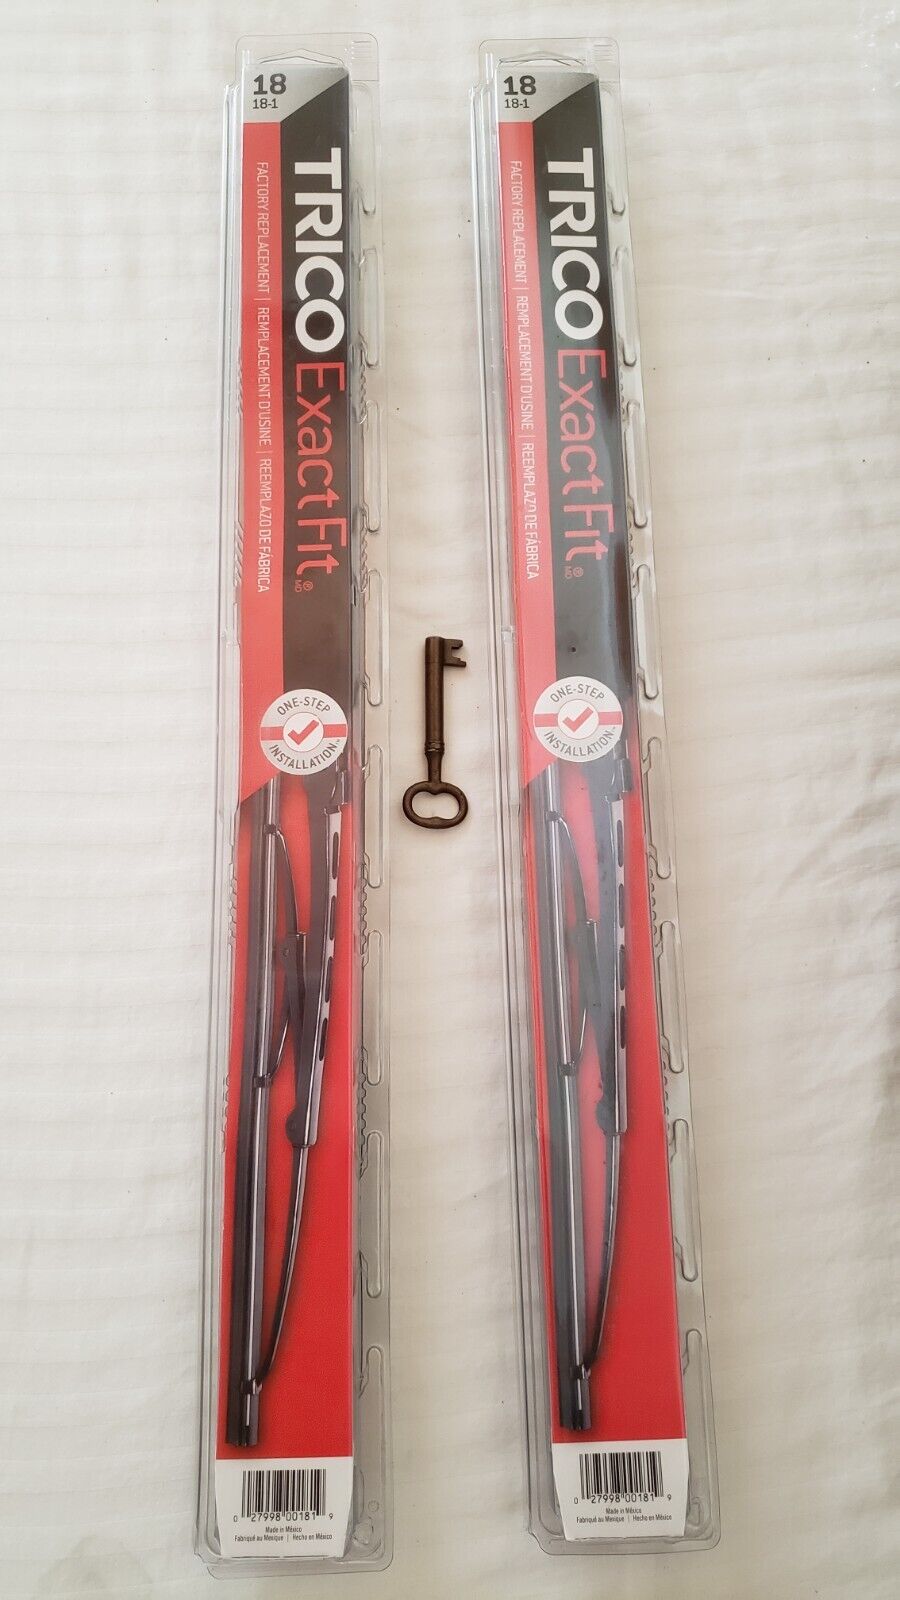 TRICO Exact Fit 18-1 Exact Fit 18" Wiper Blades 1 Pair (2 blades)